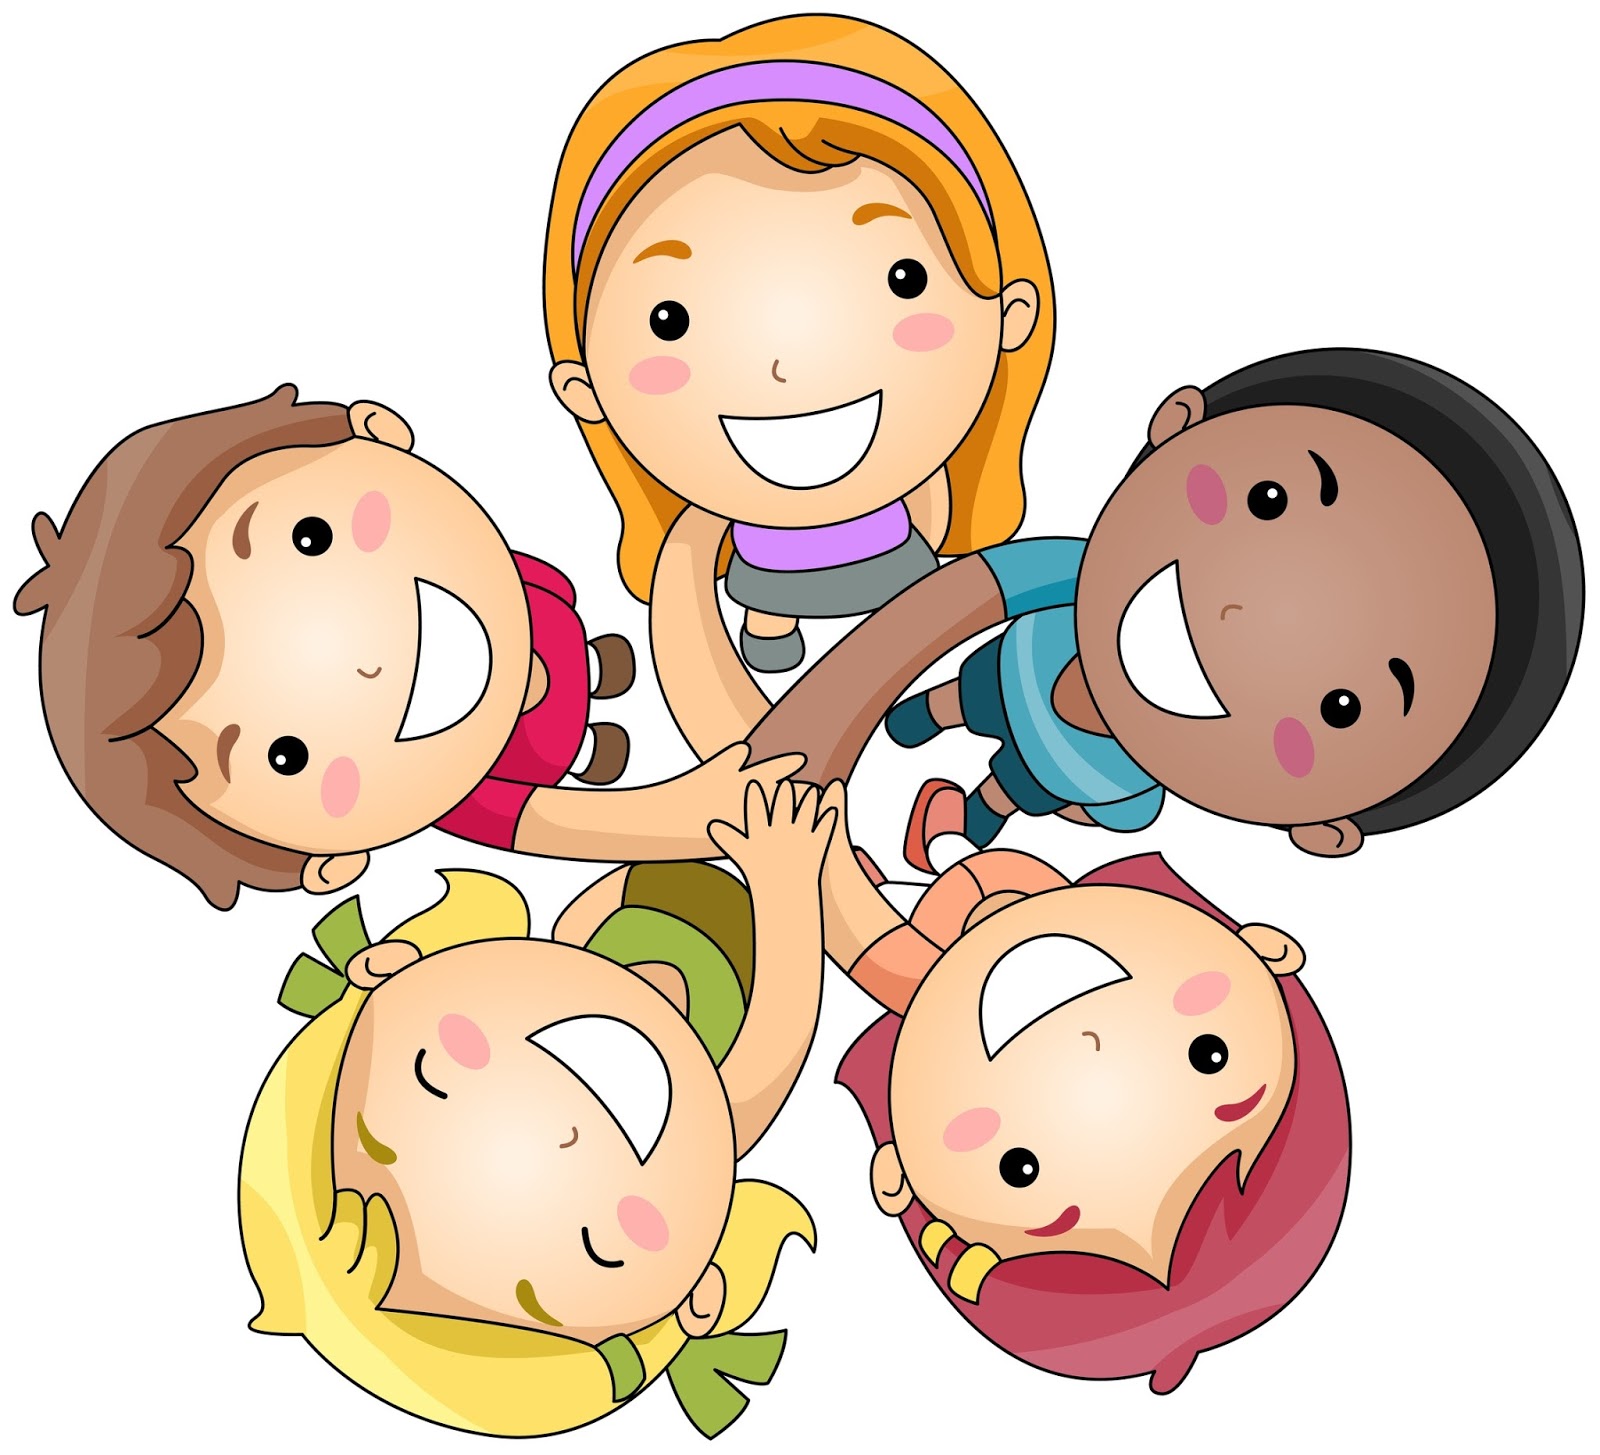 Group Of Friends Hanging Out Clipart | Clipart Panda - Free ...